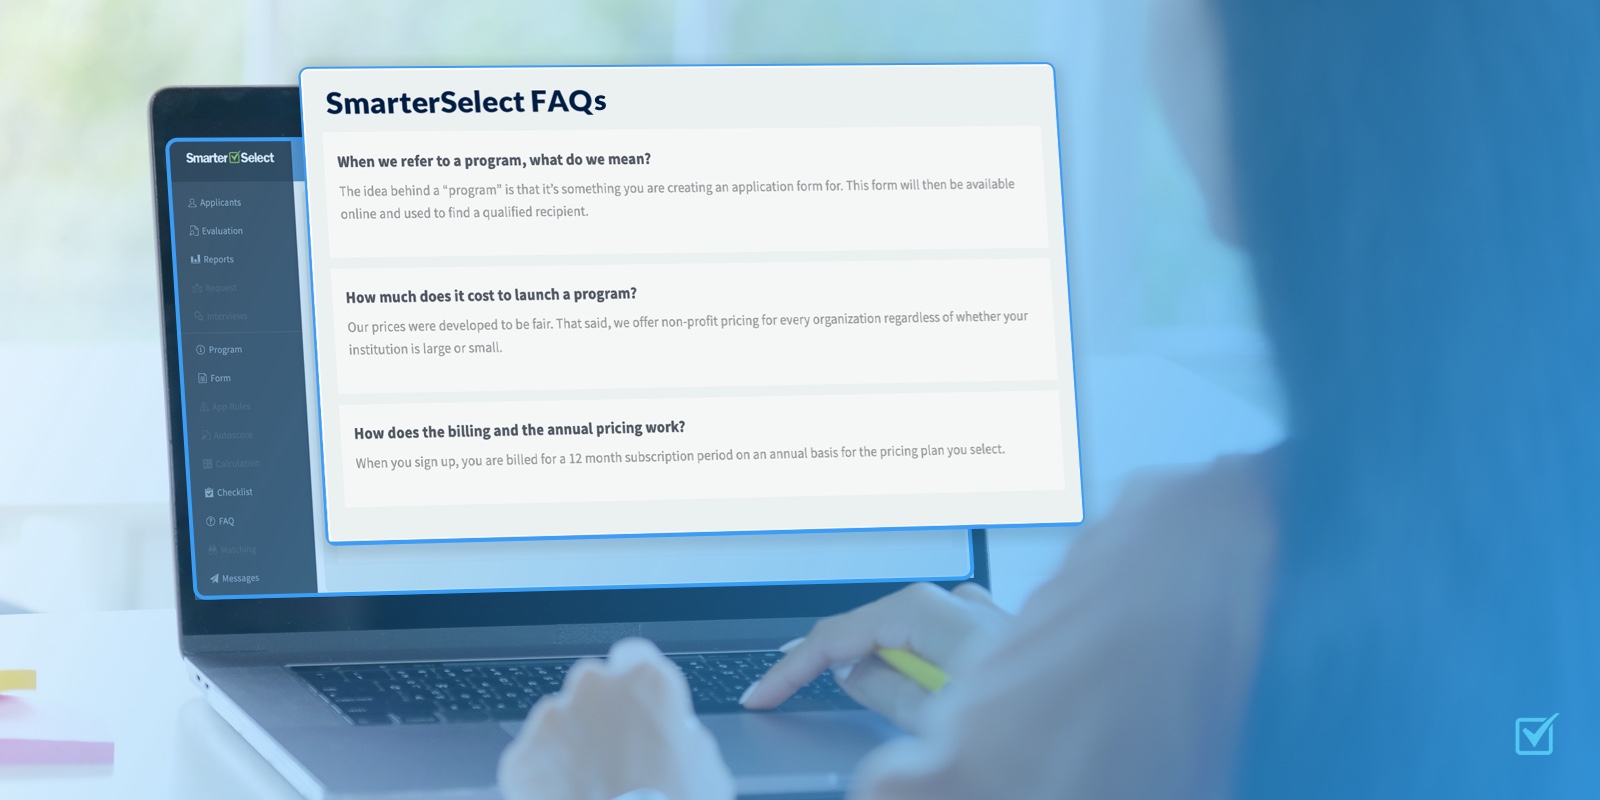 FAQs about SmarterSelect